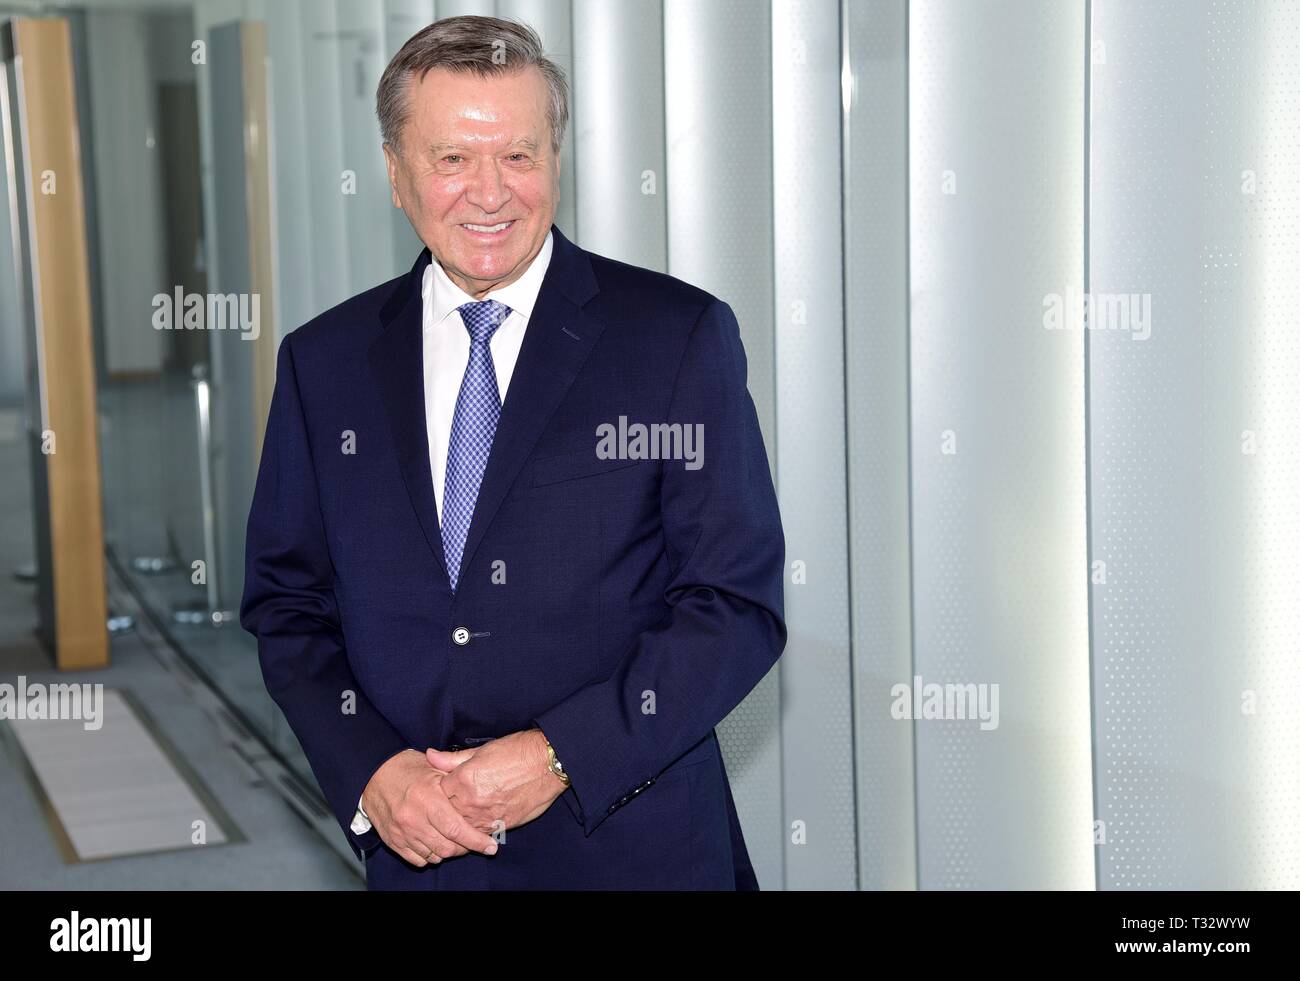 President of Gazprom, Viktor Zubkov in Milan. The company is the main oil supplier in Russia  Featuring: Viktor Zubkov Where: Milan, Italy When: 05 Mar 2019 Credit: IPA/WENN.com  **Only available for publication in UK, USA, Germany, Austria, Switzerland** Stock Photo